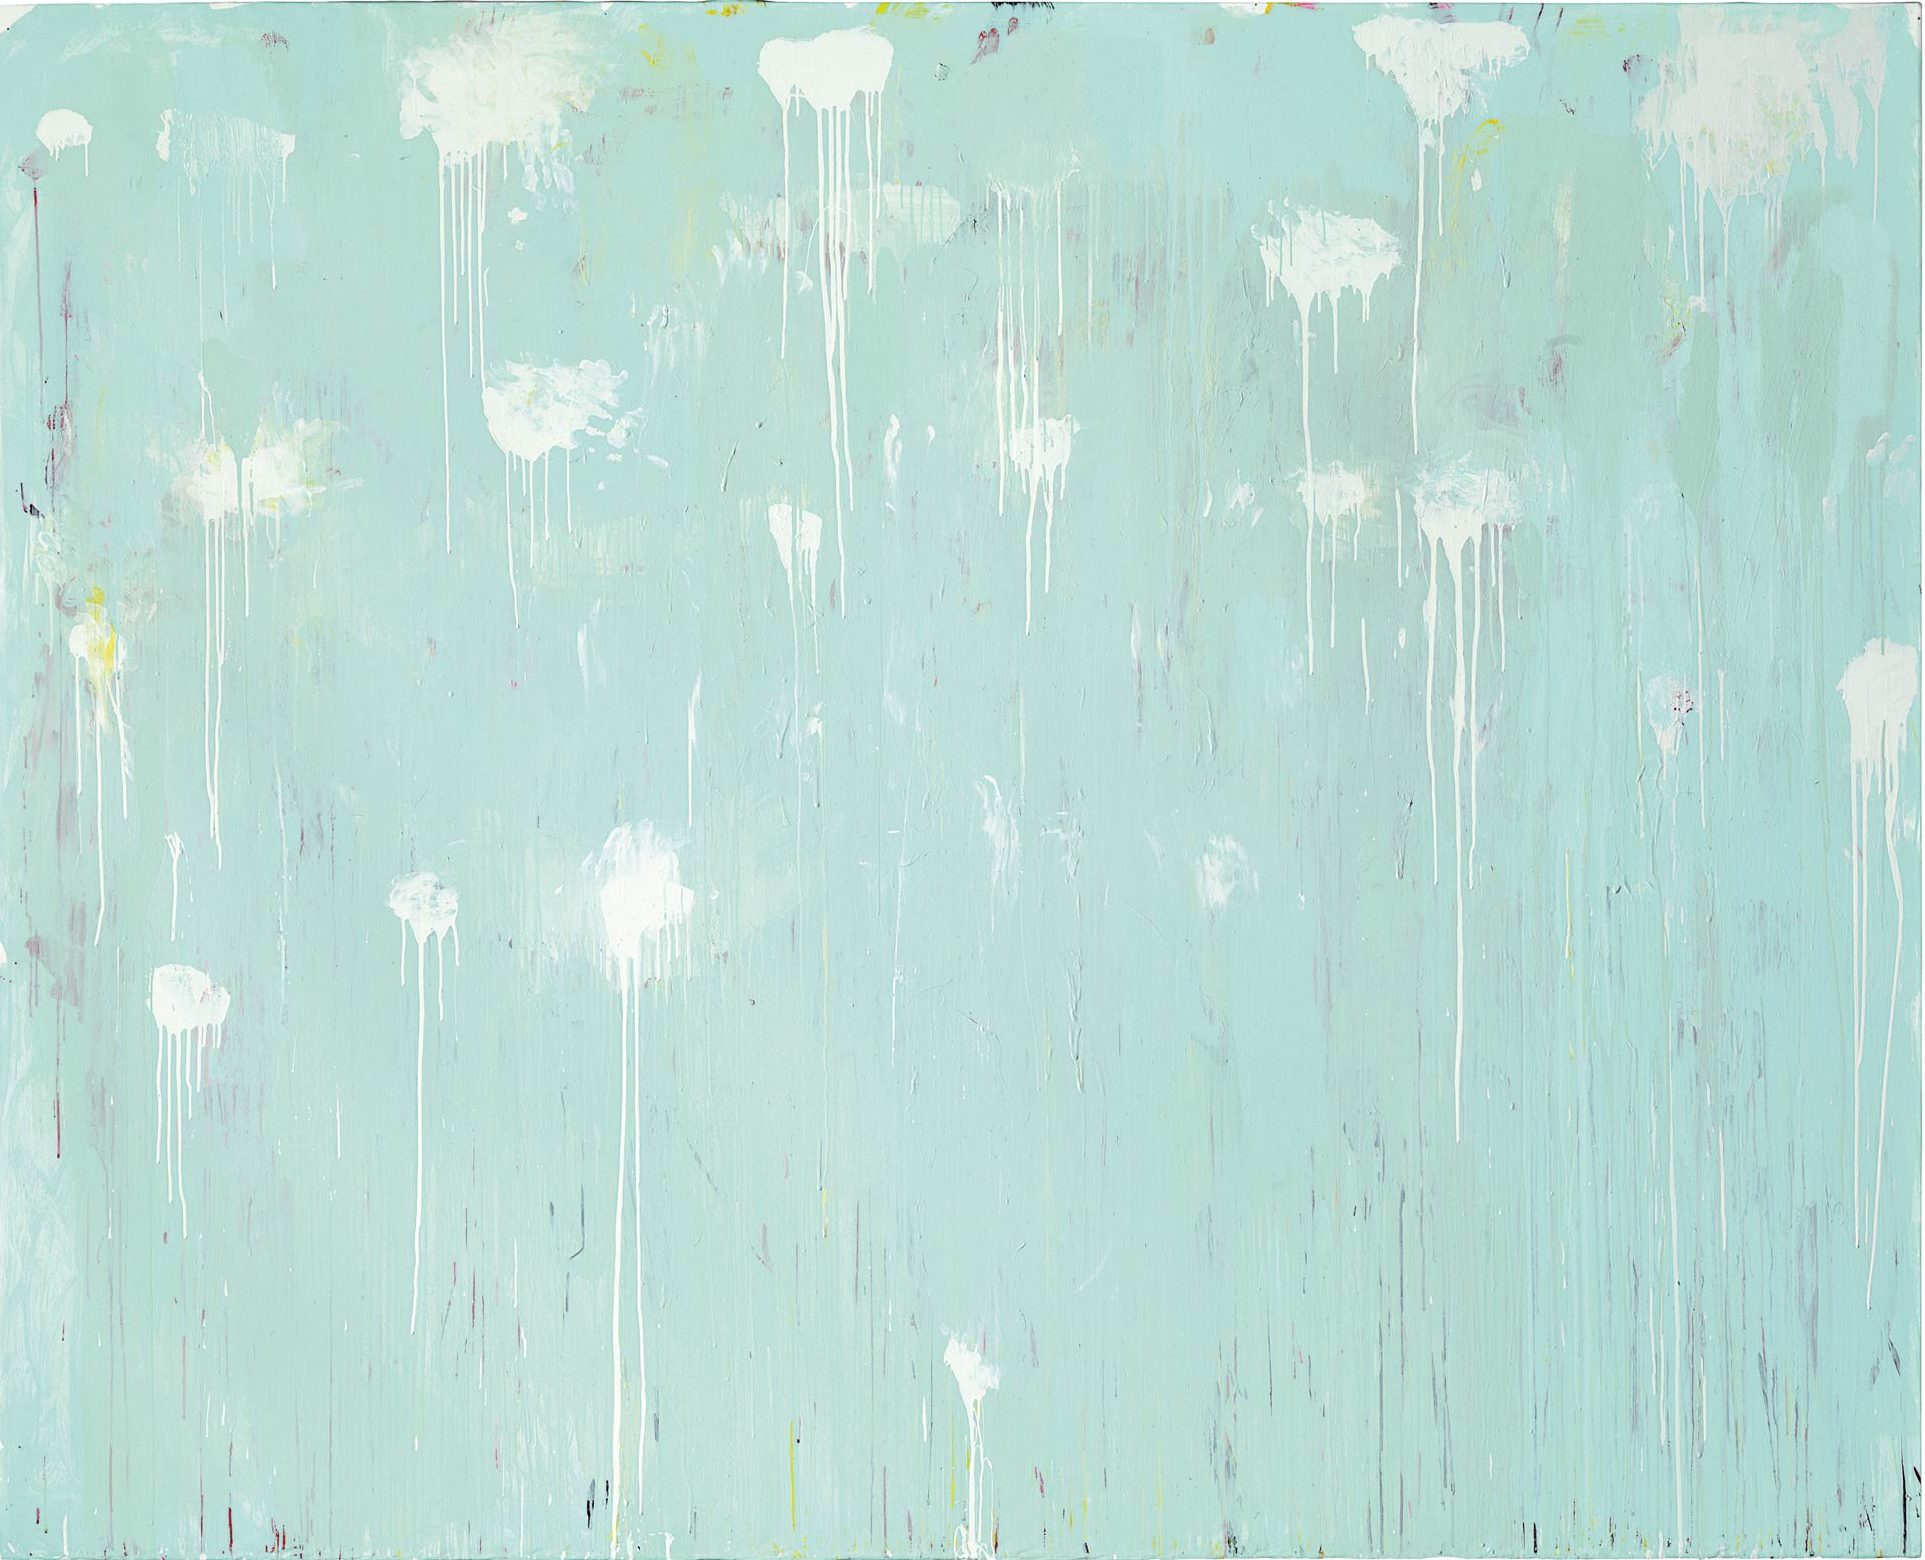 Cy Twombly Untitled (A Gathering of Time), 2003, Acrylic on canvas, 215.9 × 267.3 cm © Cy Twombly Foundation